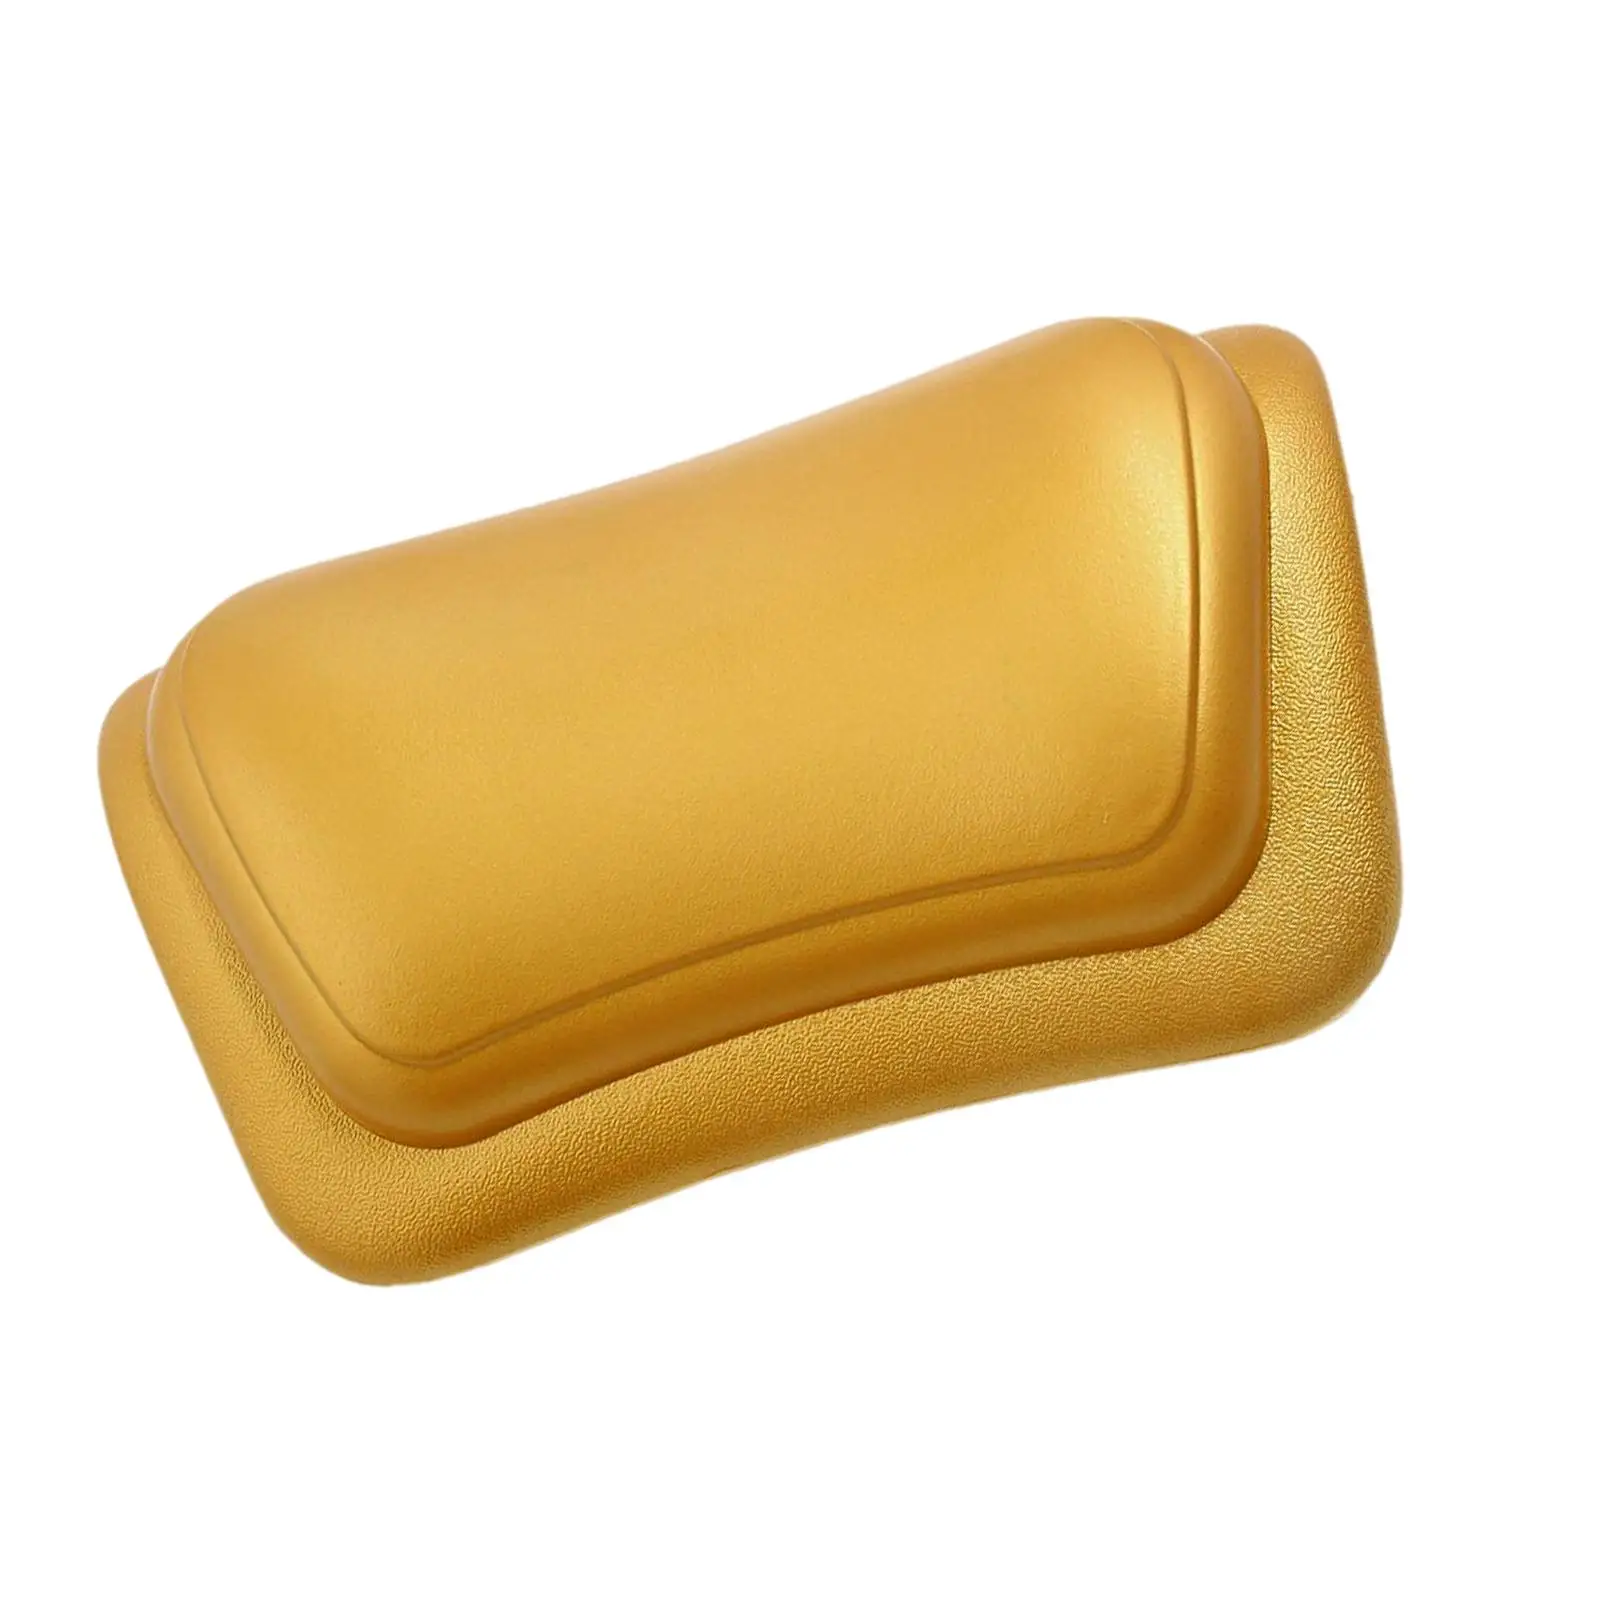 Bathtub Pillow Strong Suction Waterproof Support Cushion Headrest for Home